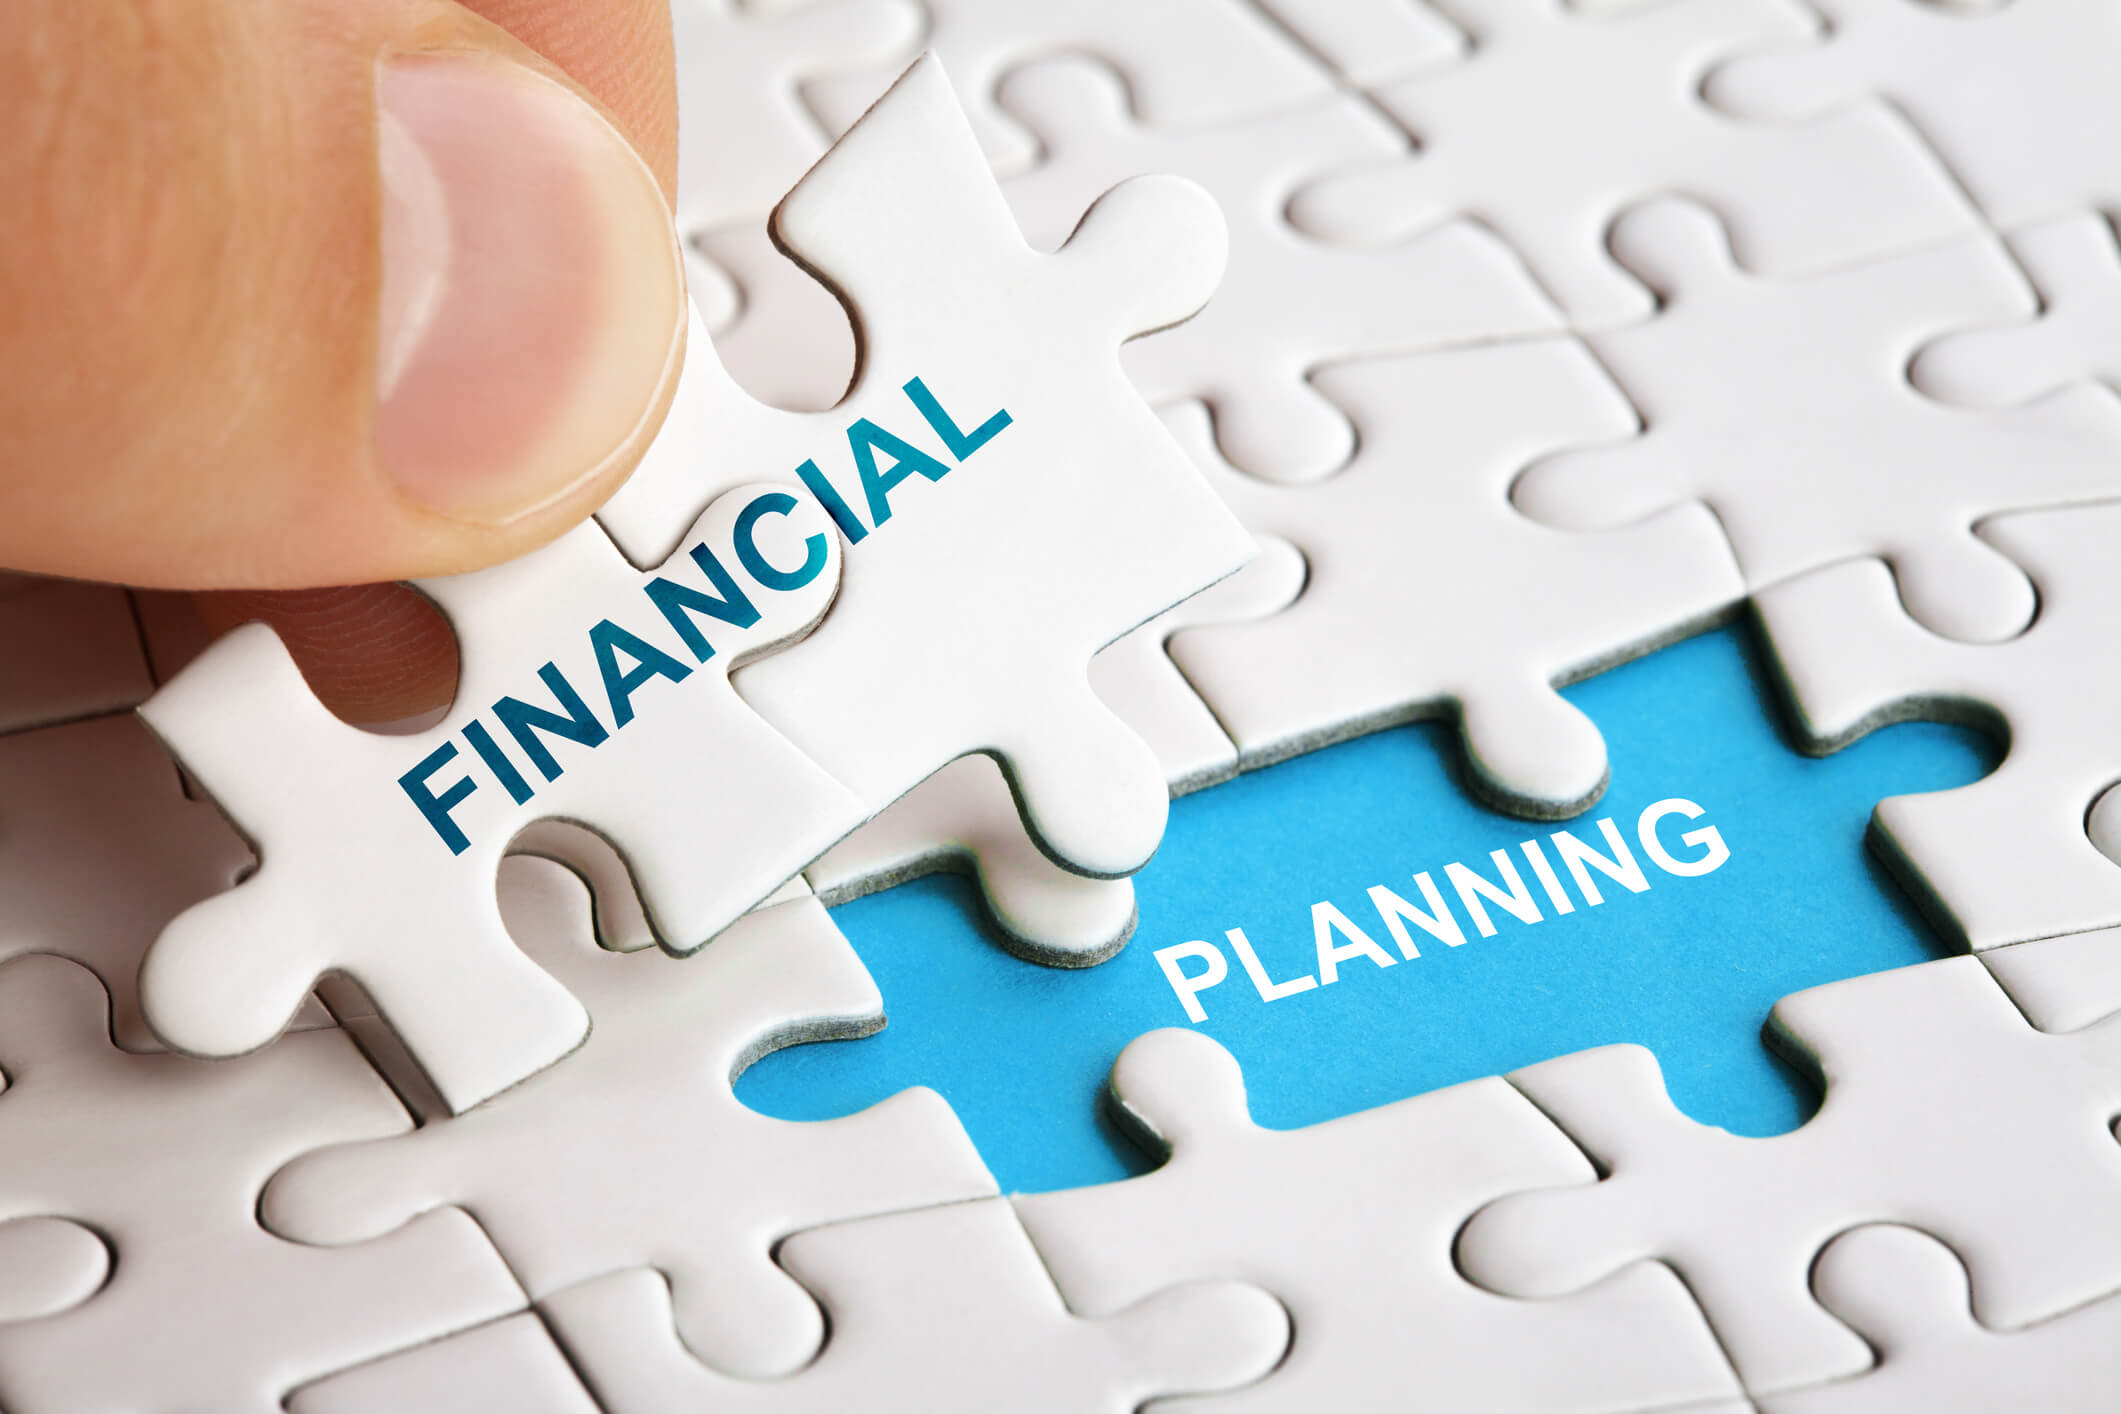 Financial Planning - Complete Controller